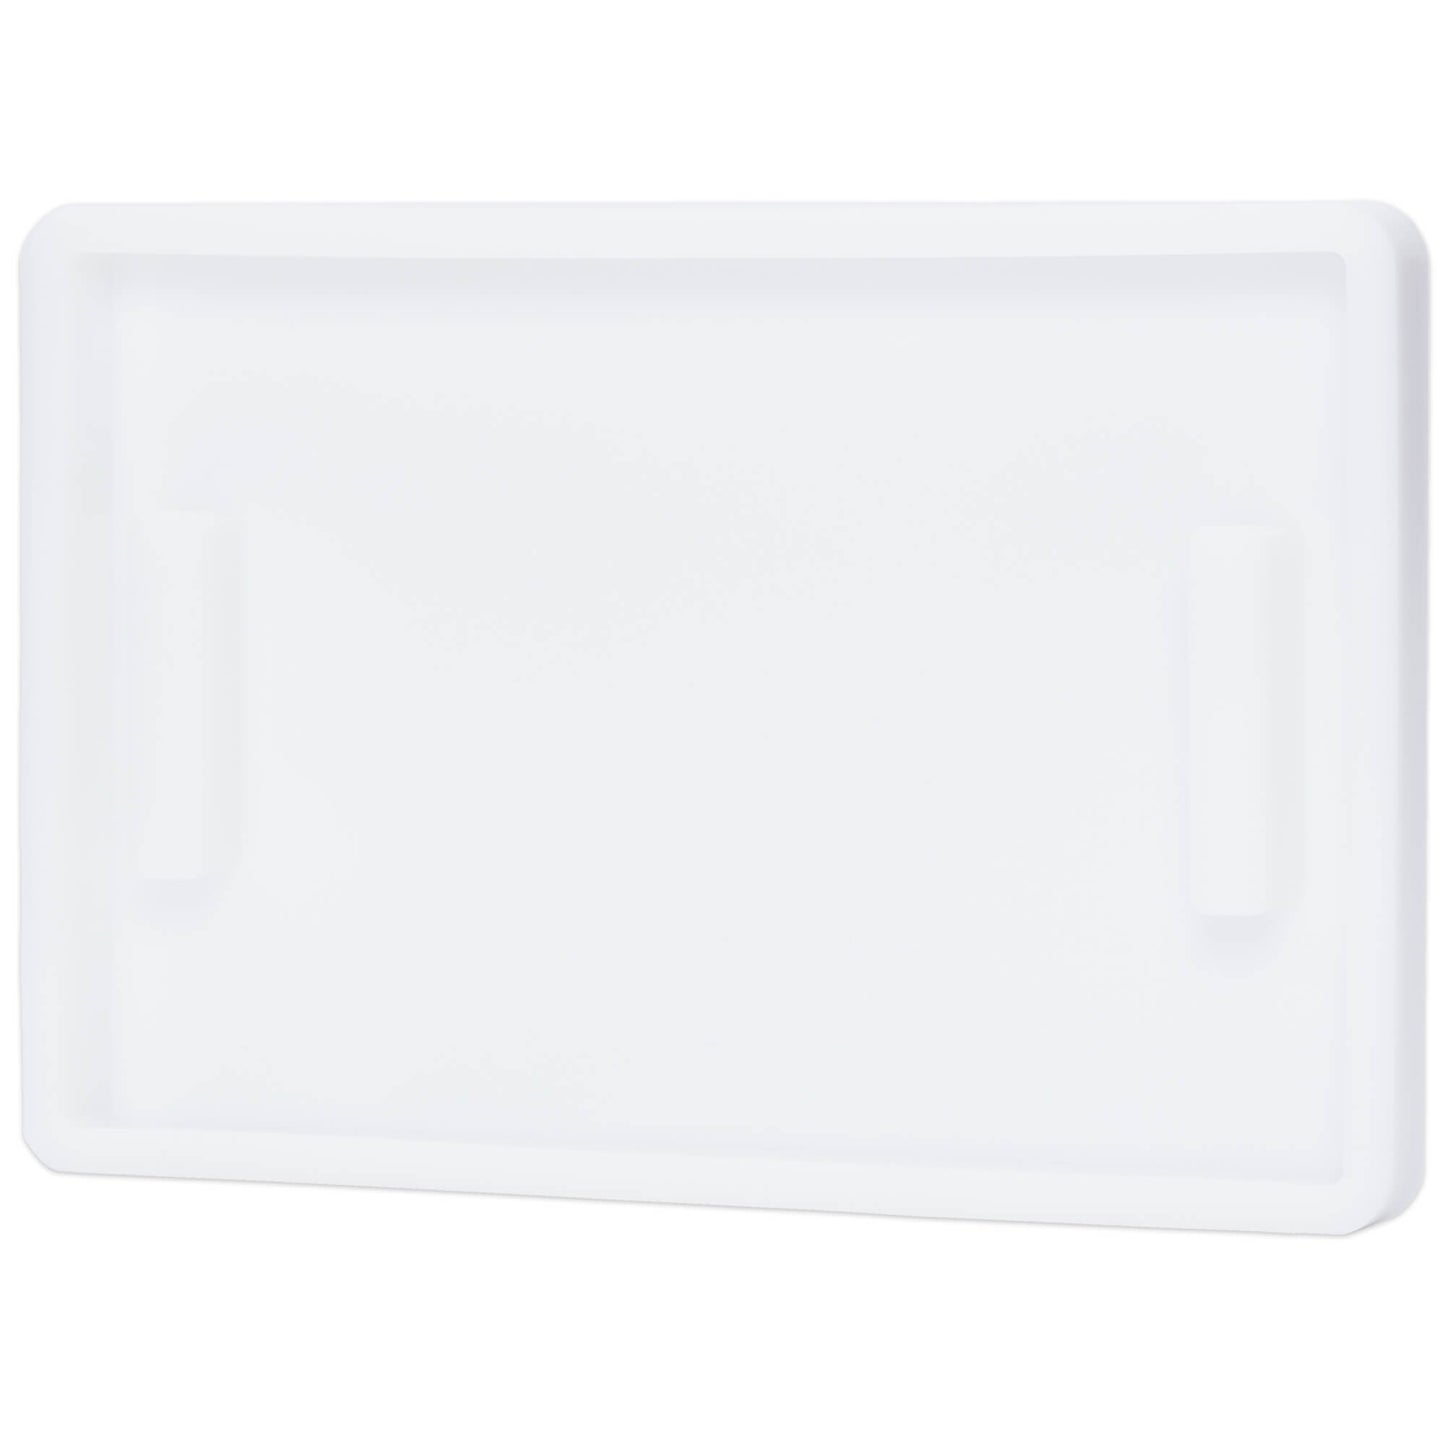 TotalBoat Large Silicone Mold - Rectangle with Handles